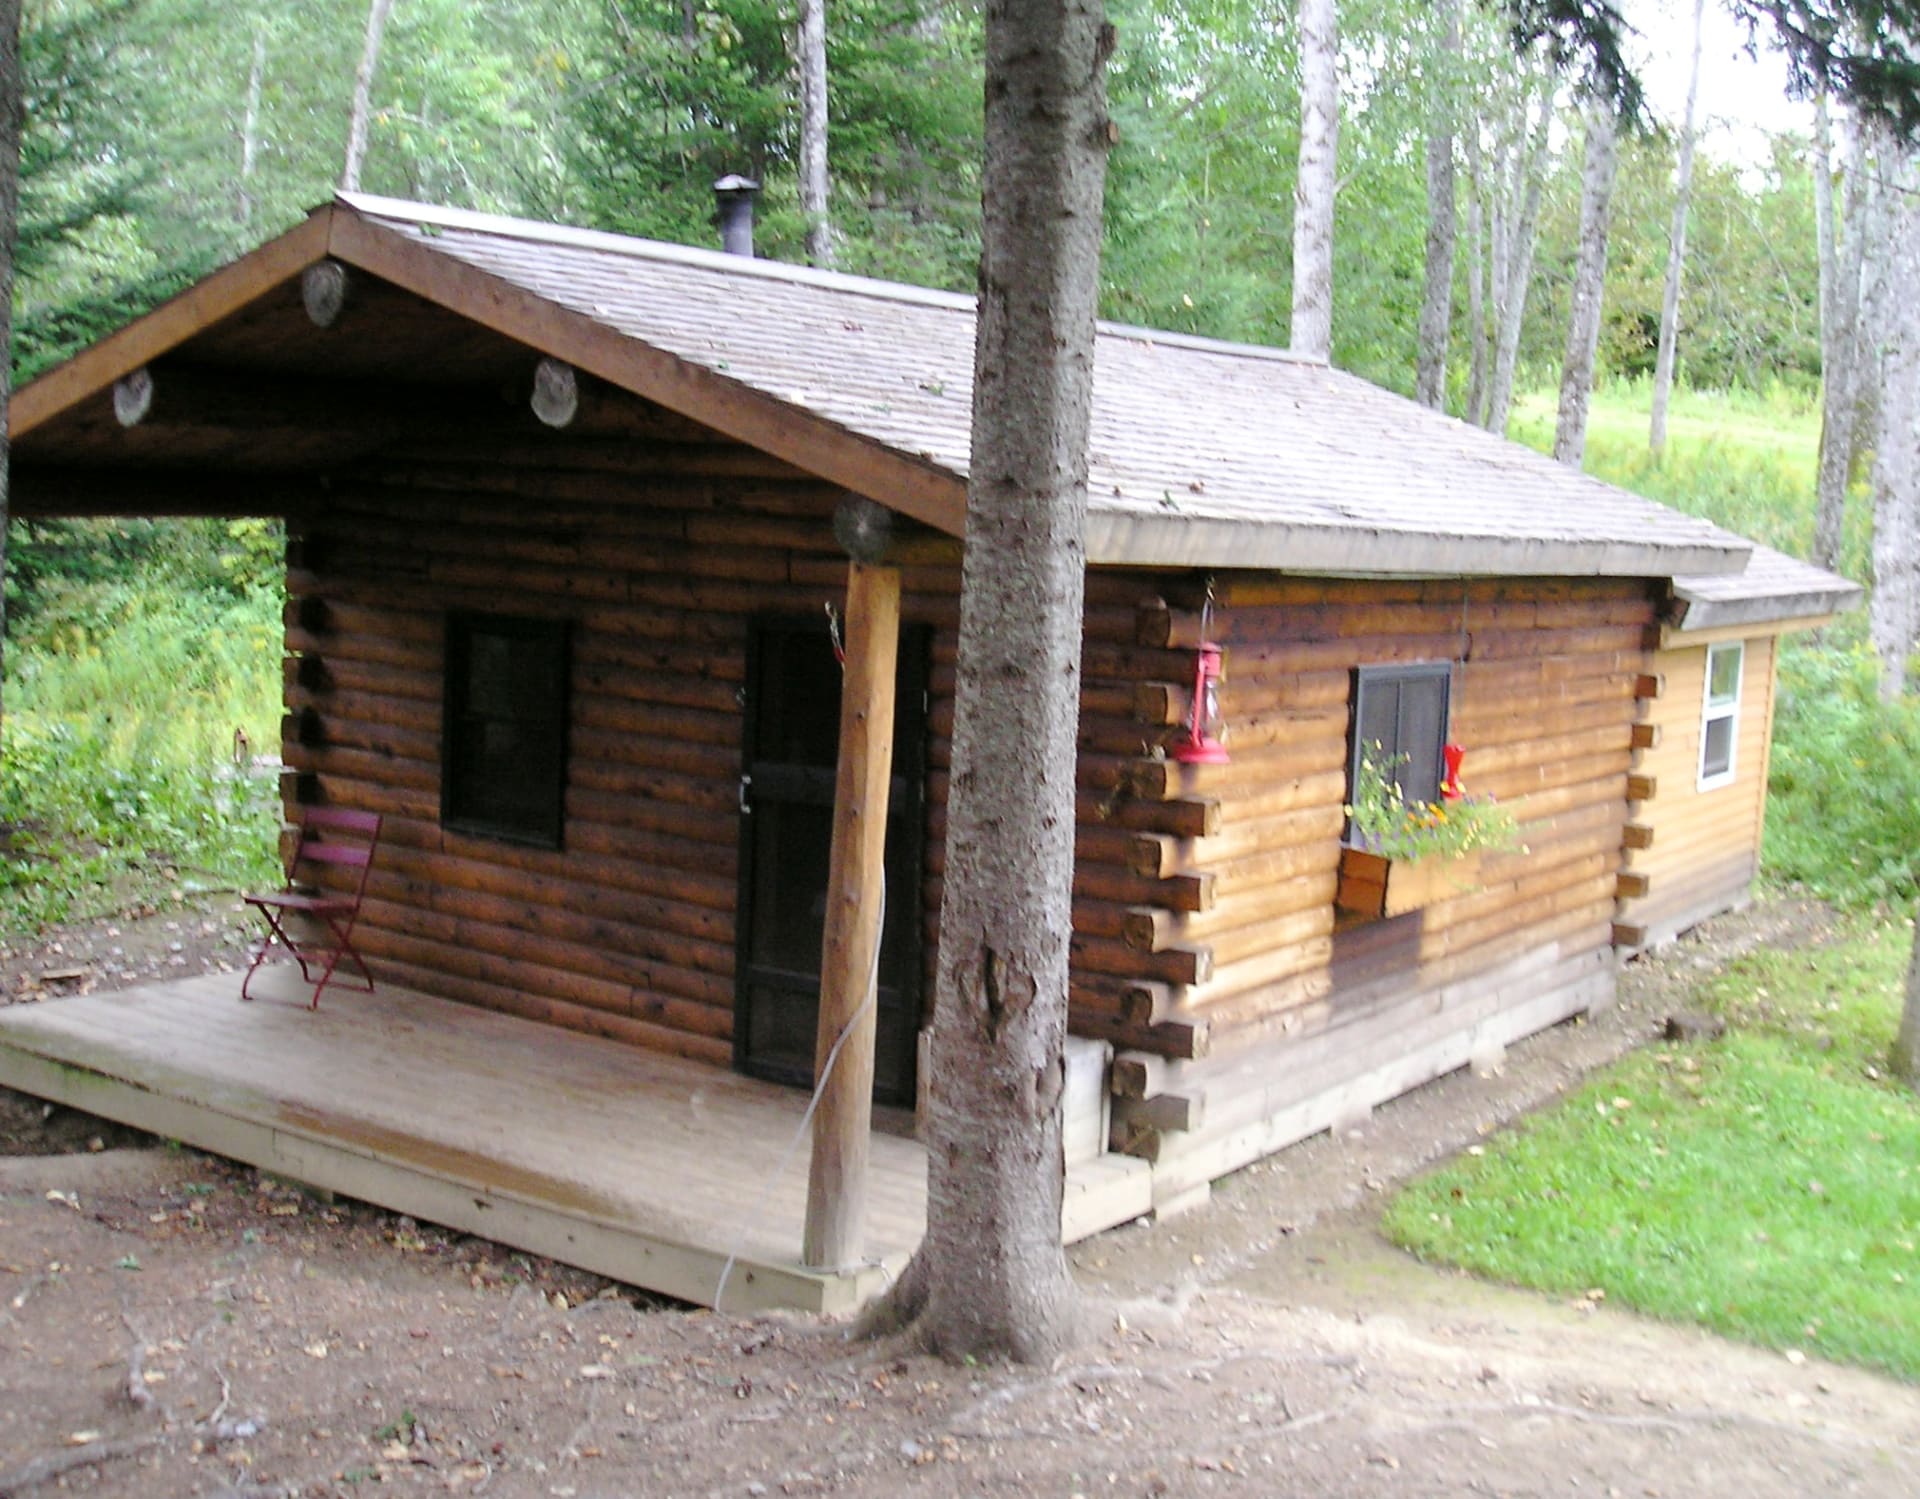 The Riverbend Cabin! Our sweet, off grid piece of heaven!